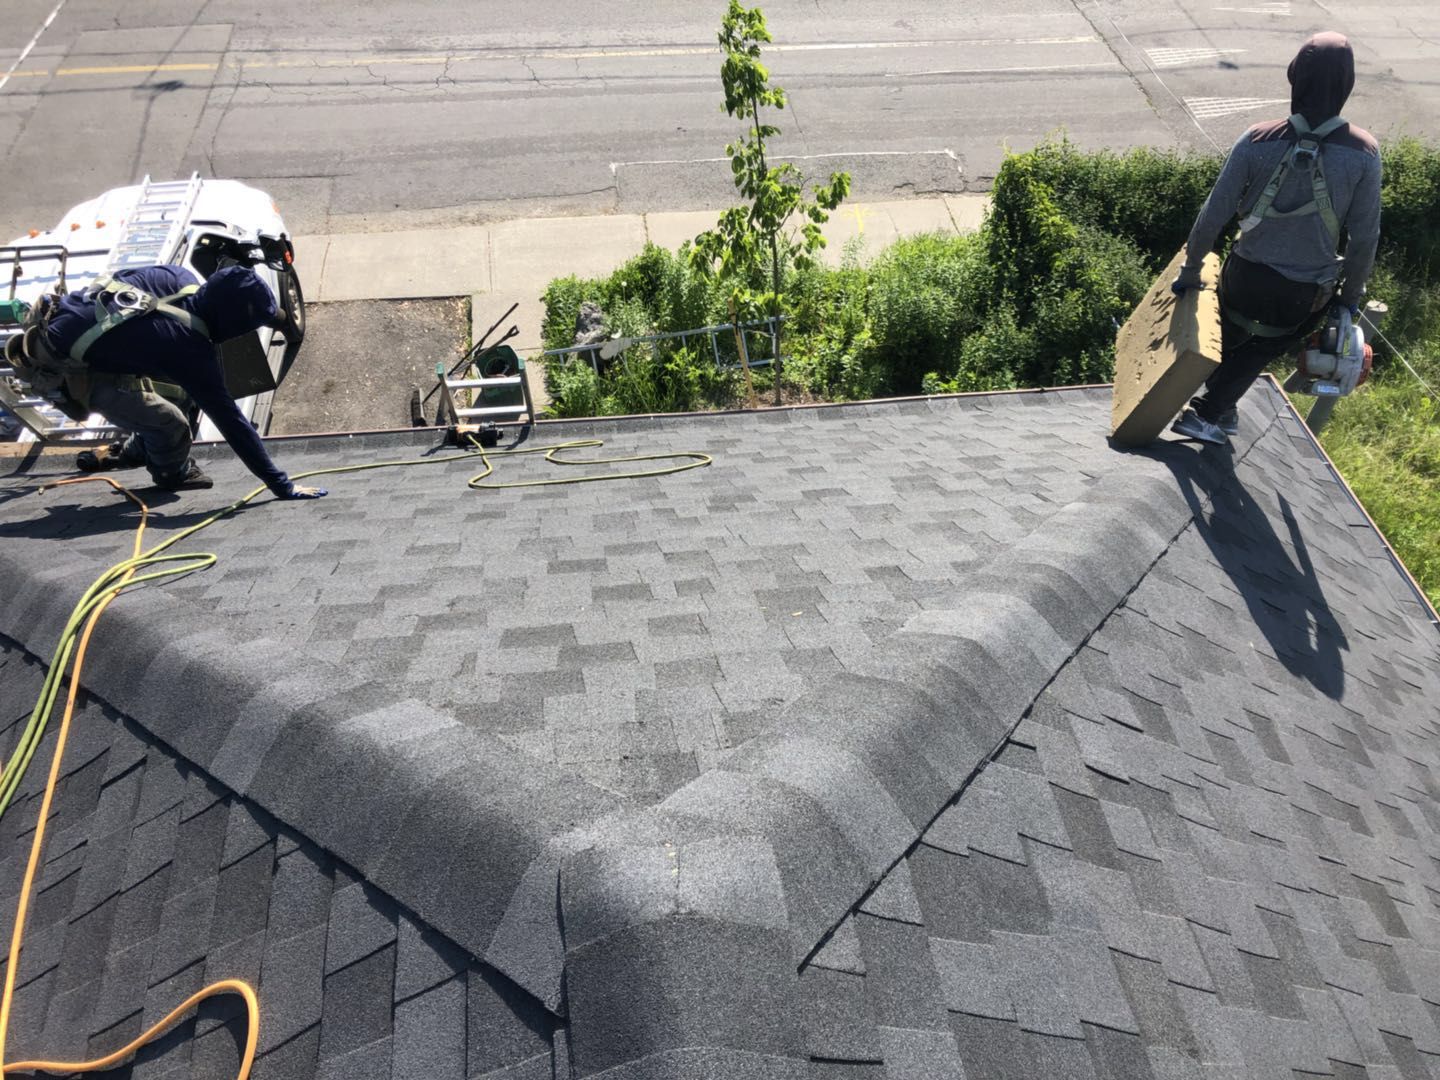 Home - Toronto Roofing Company | Roof Repair \u0026 Replacement Contractor